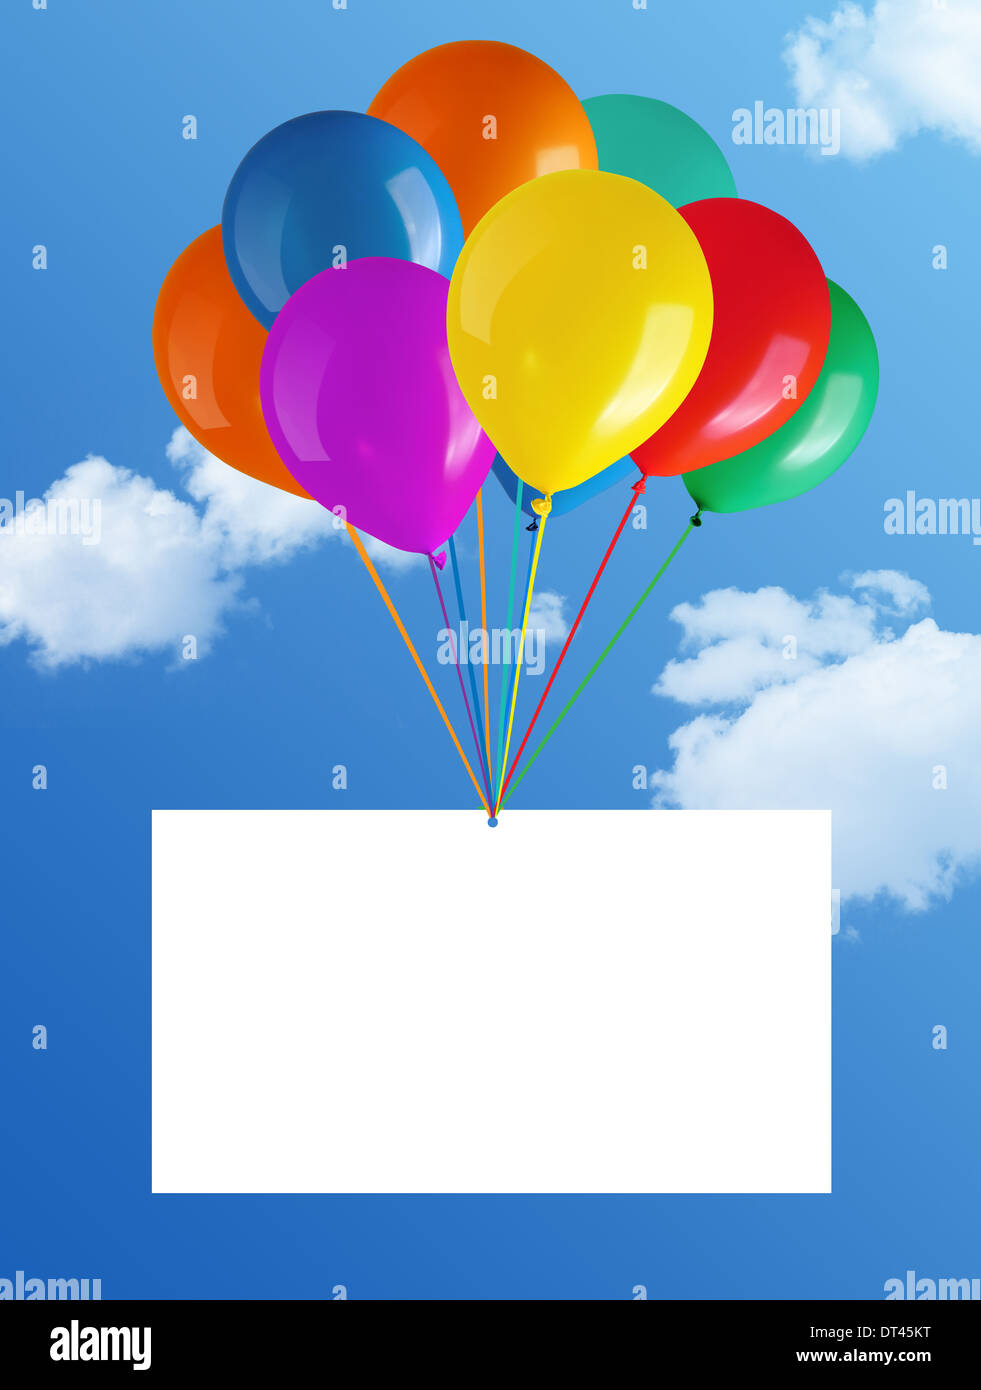 party colorful balloons Stock Photo